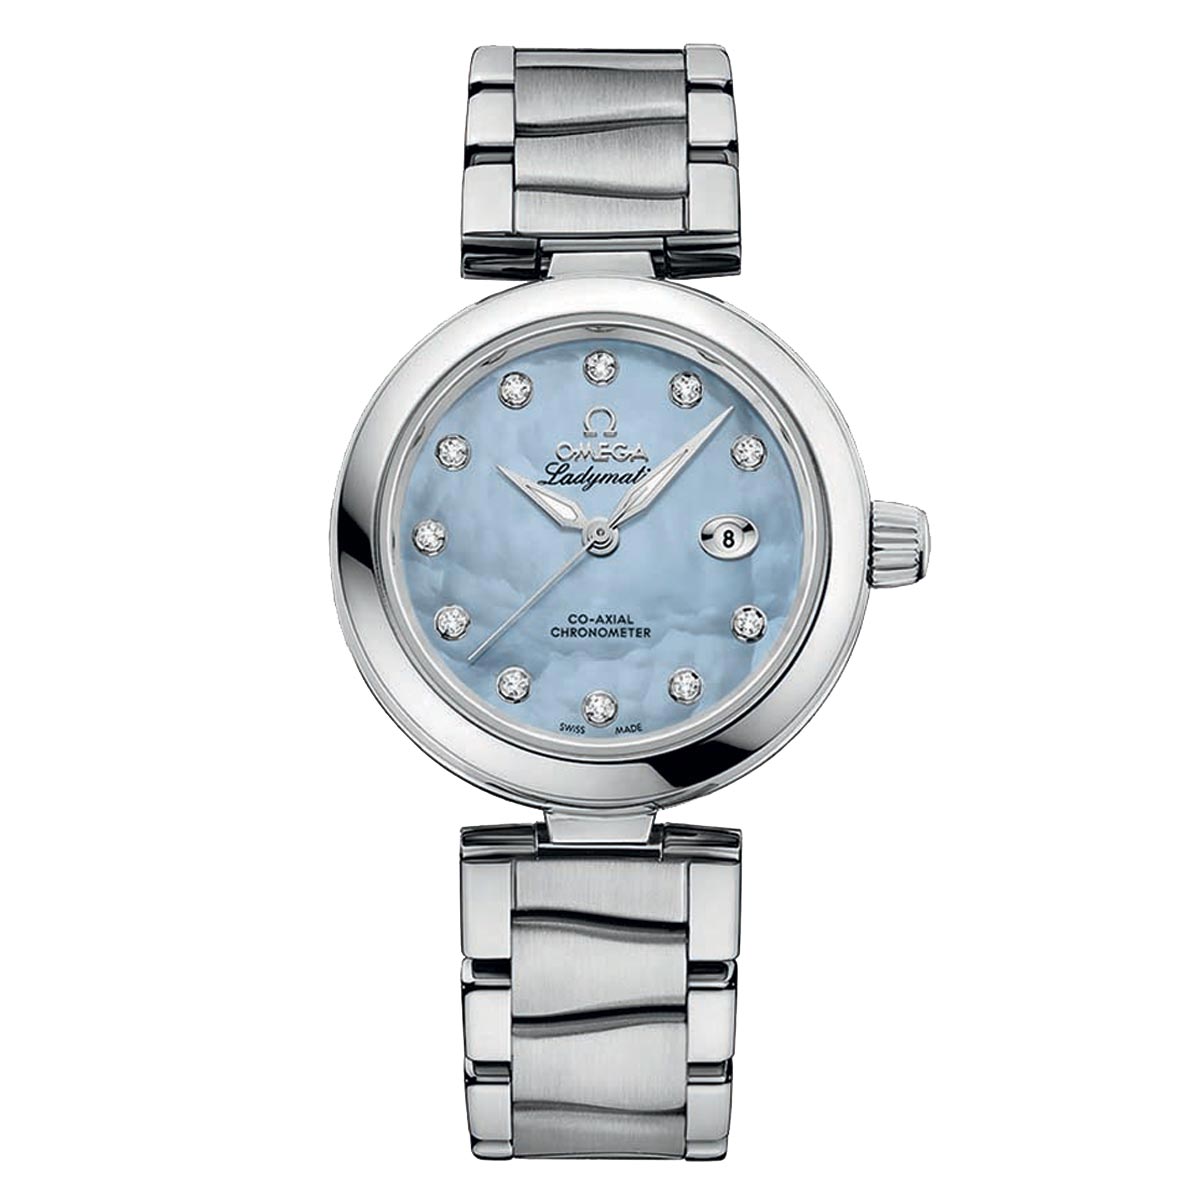 OMEGA De Ville Ladymatic Co-Axial Chronometer 34mm Watch